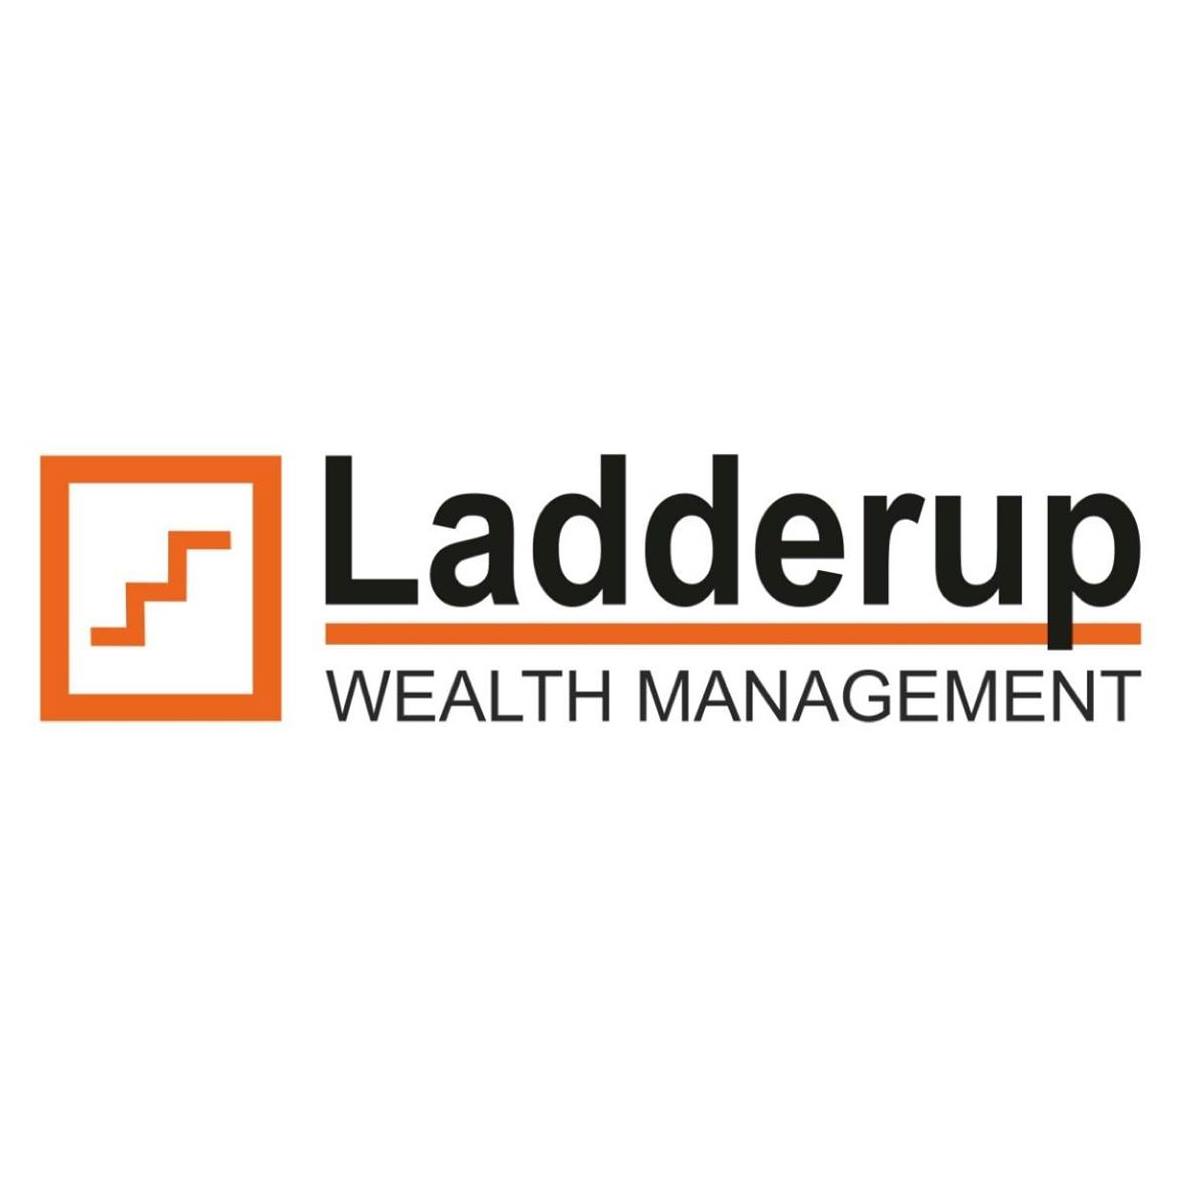 Best Wealth Management Firms in India | Ladderup Wealth